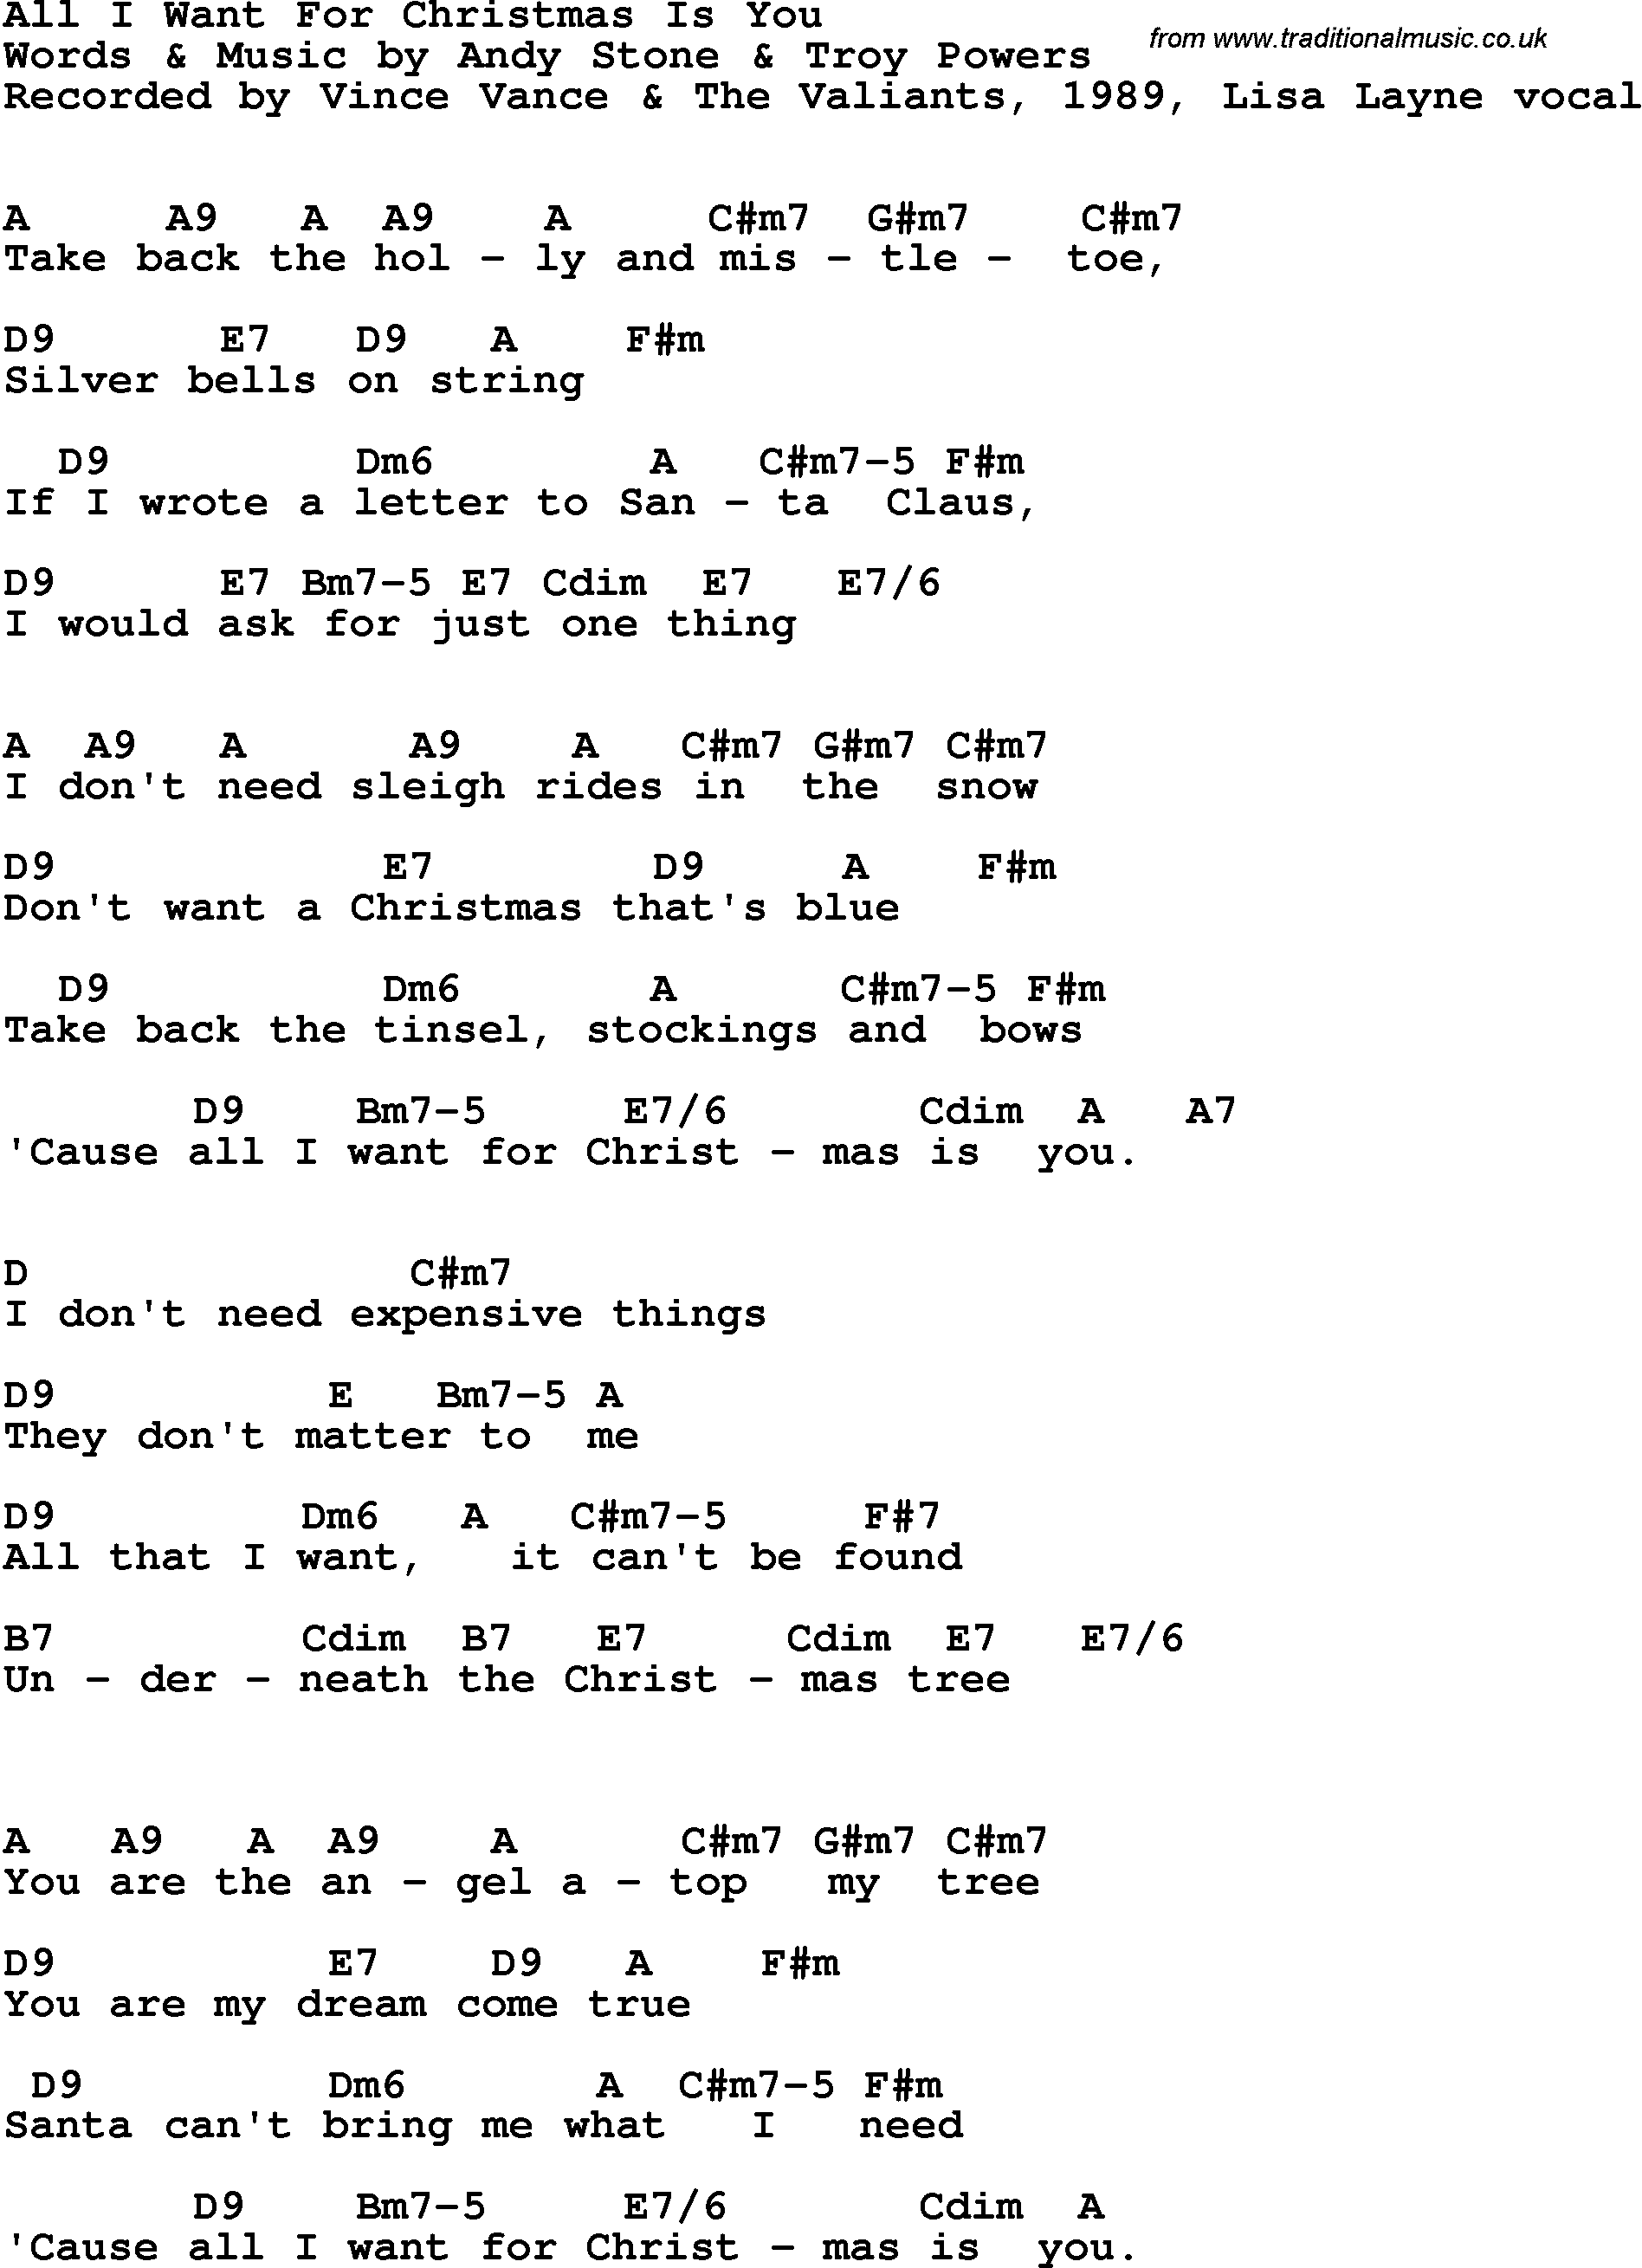 Song Lyrics with guitar chords for All I Want For Christmas Is You - Vince Vance & The Valiants, 1989